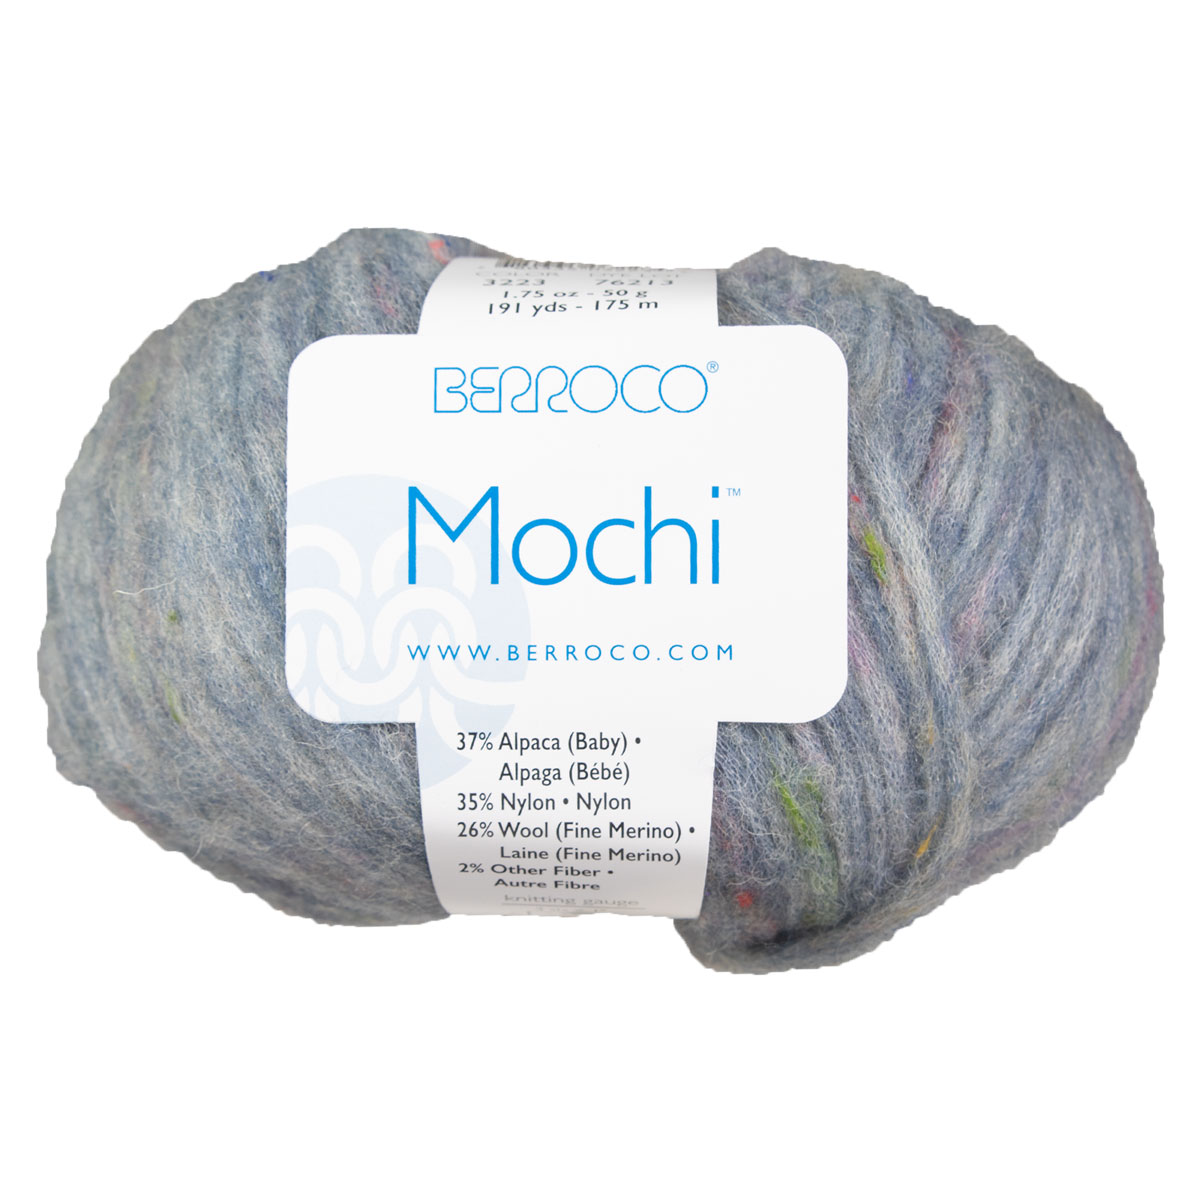 Berroco Comfort Yarn - 9736 Primary Blue at Jimmy Beans Wool